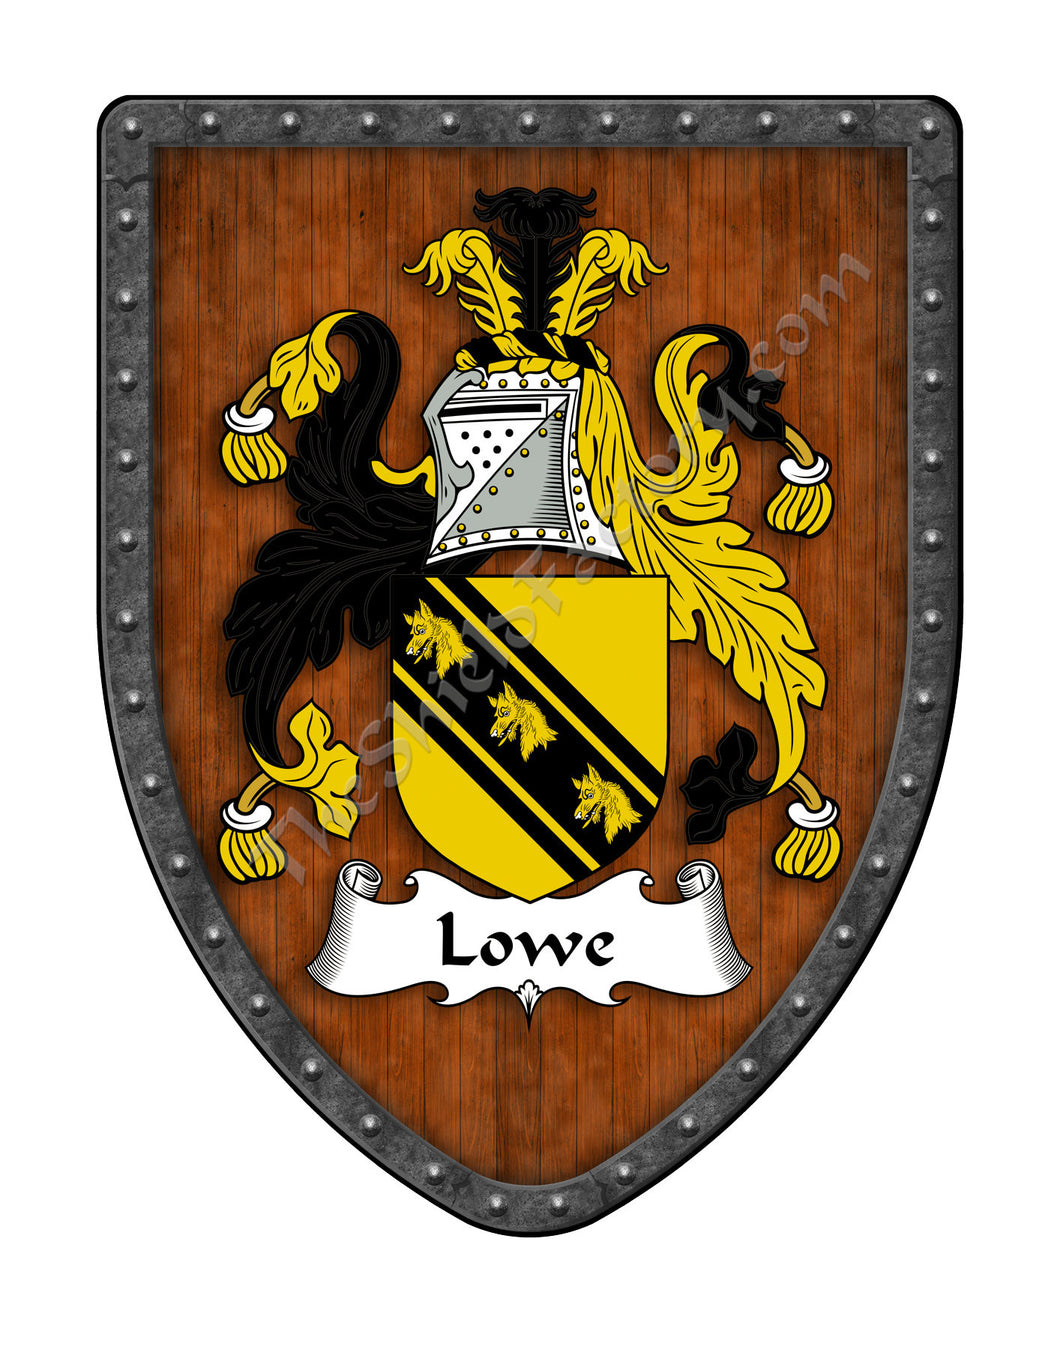 Lowe Family Crest and Coat of Arms